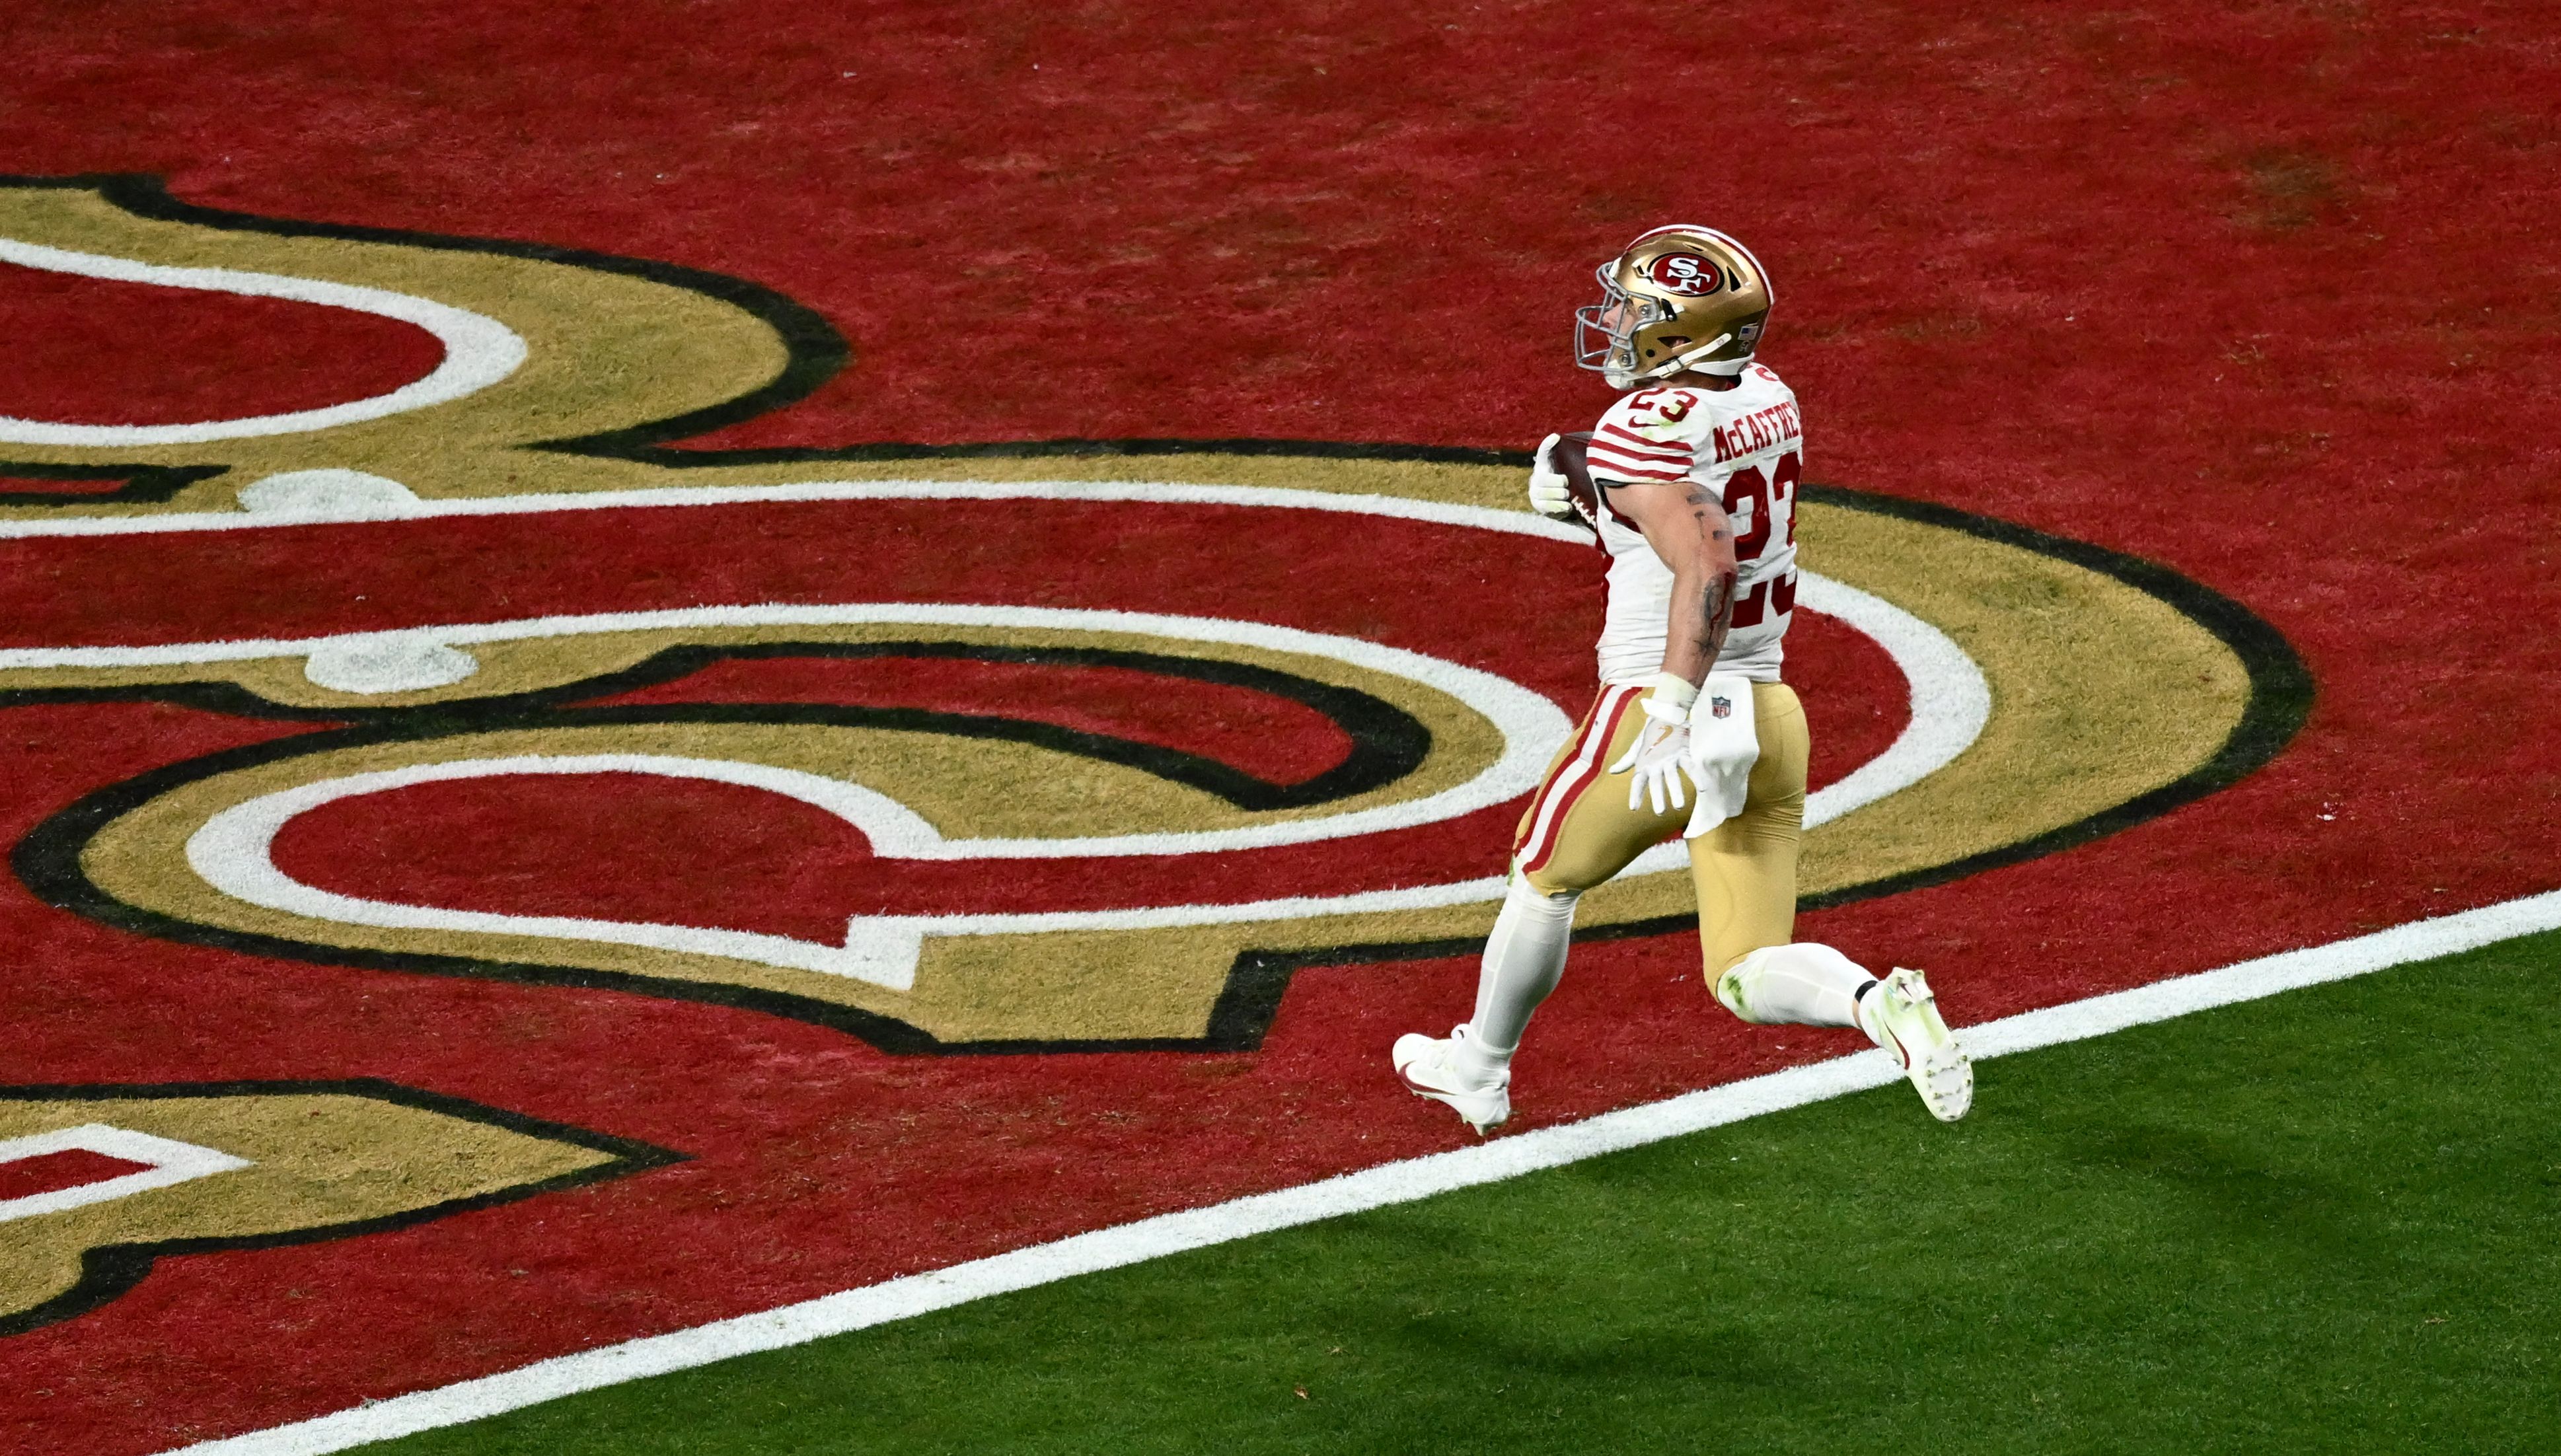  San Francisco 49ers' running back #23 Christian McCaffrey scores a touchdown during Super Bowl LVIII between the Kansas City Chiefs and the San Francisco 49ers at Allegiant Stadium in Las Vegas, Nevada, February 11, 2024.